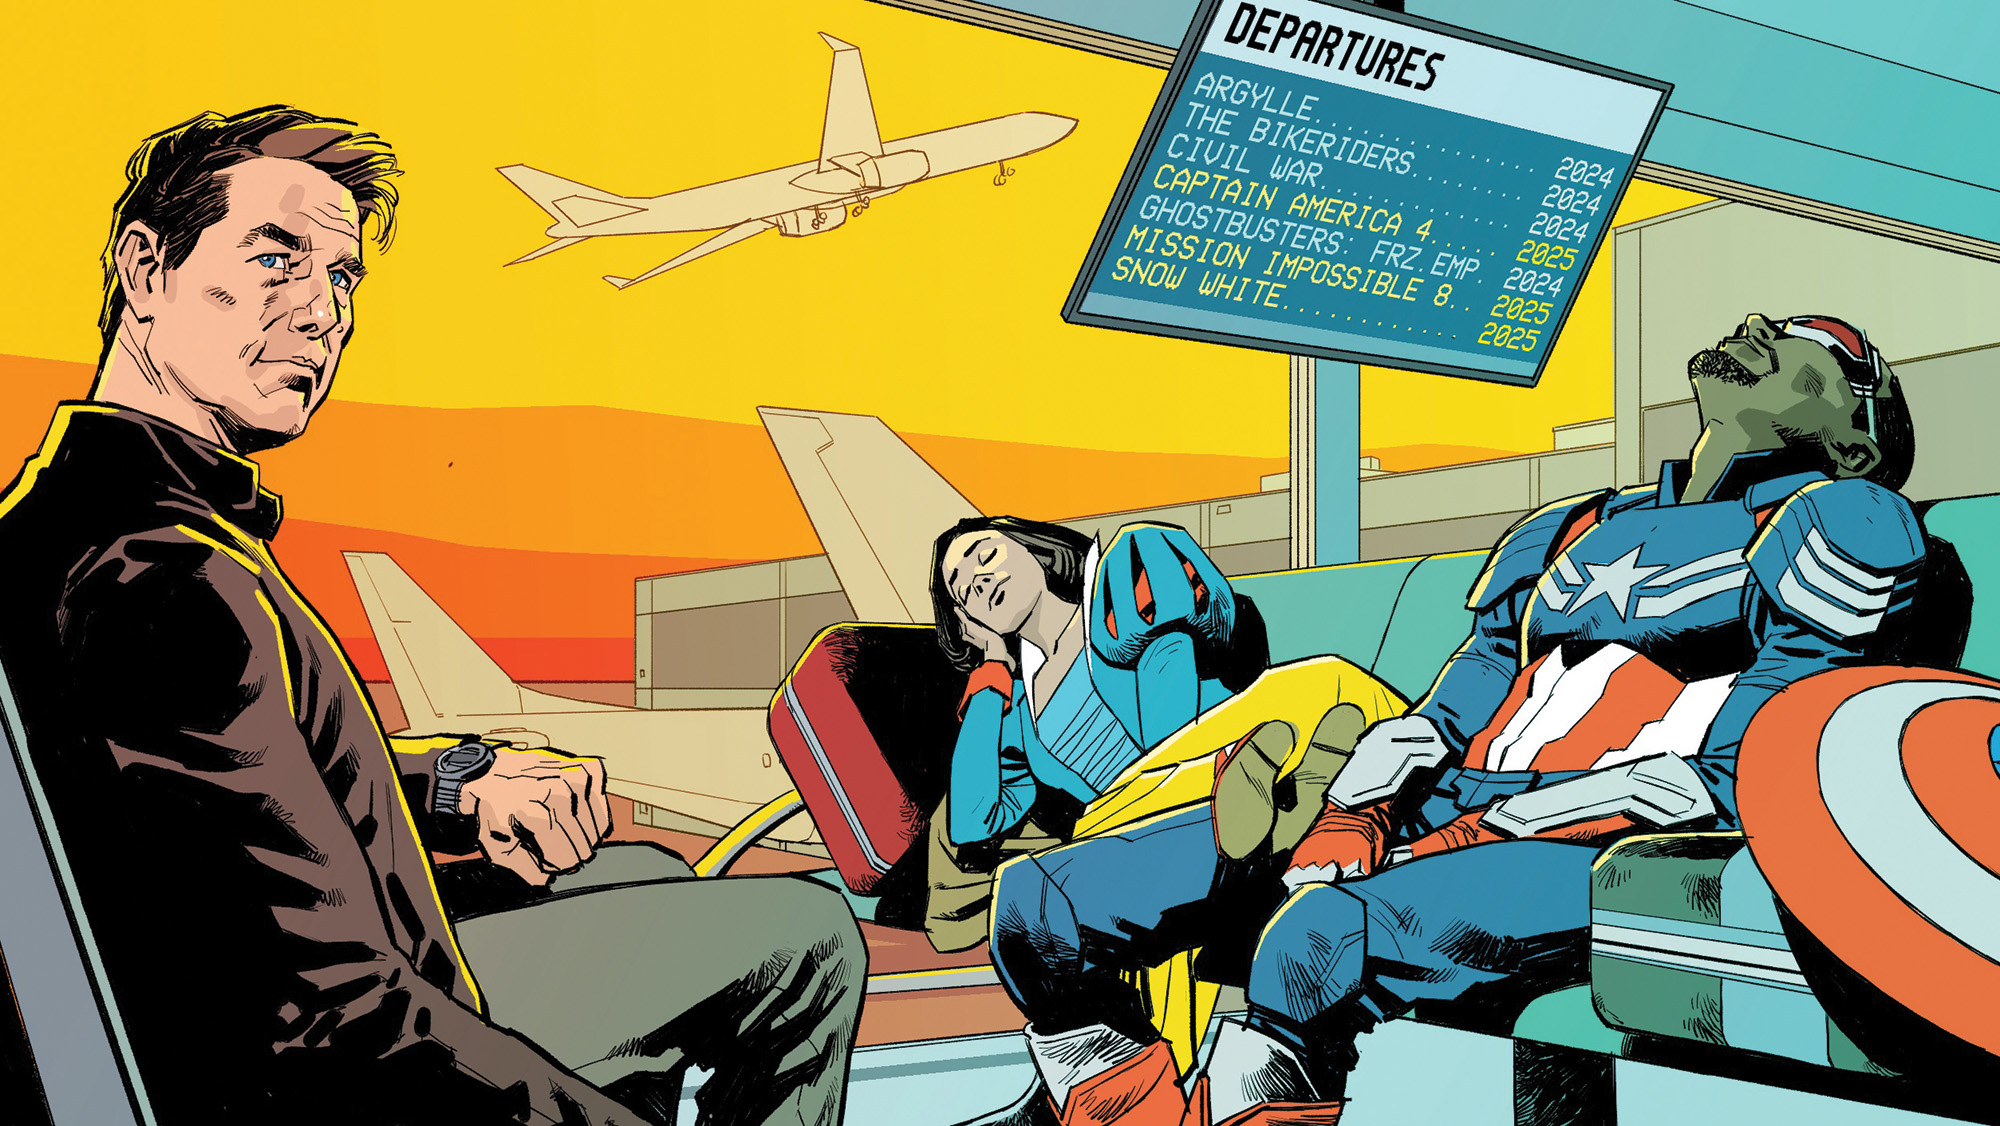 illustration of movie characters Ethan Hunt, Snow White and Falcon waiting in an airport boarding area